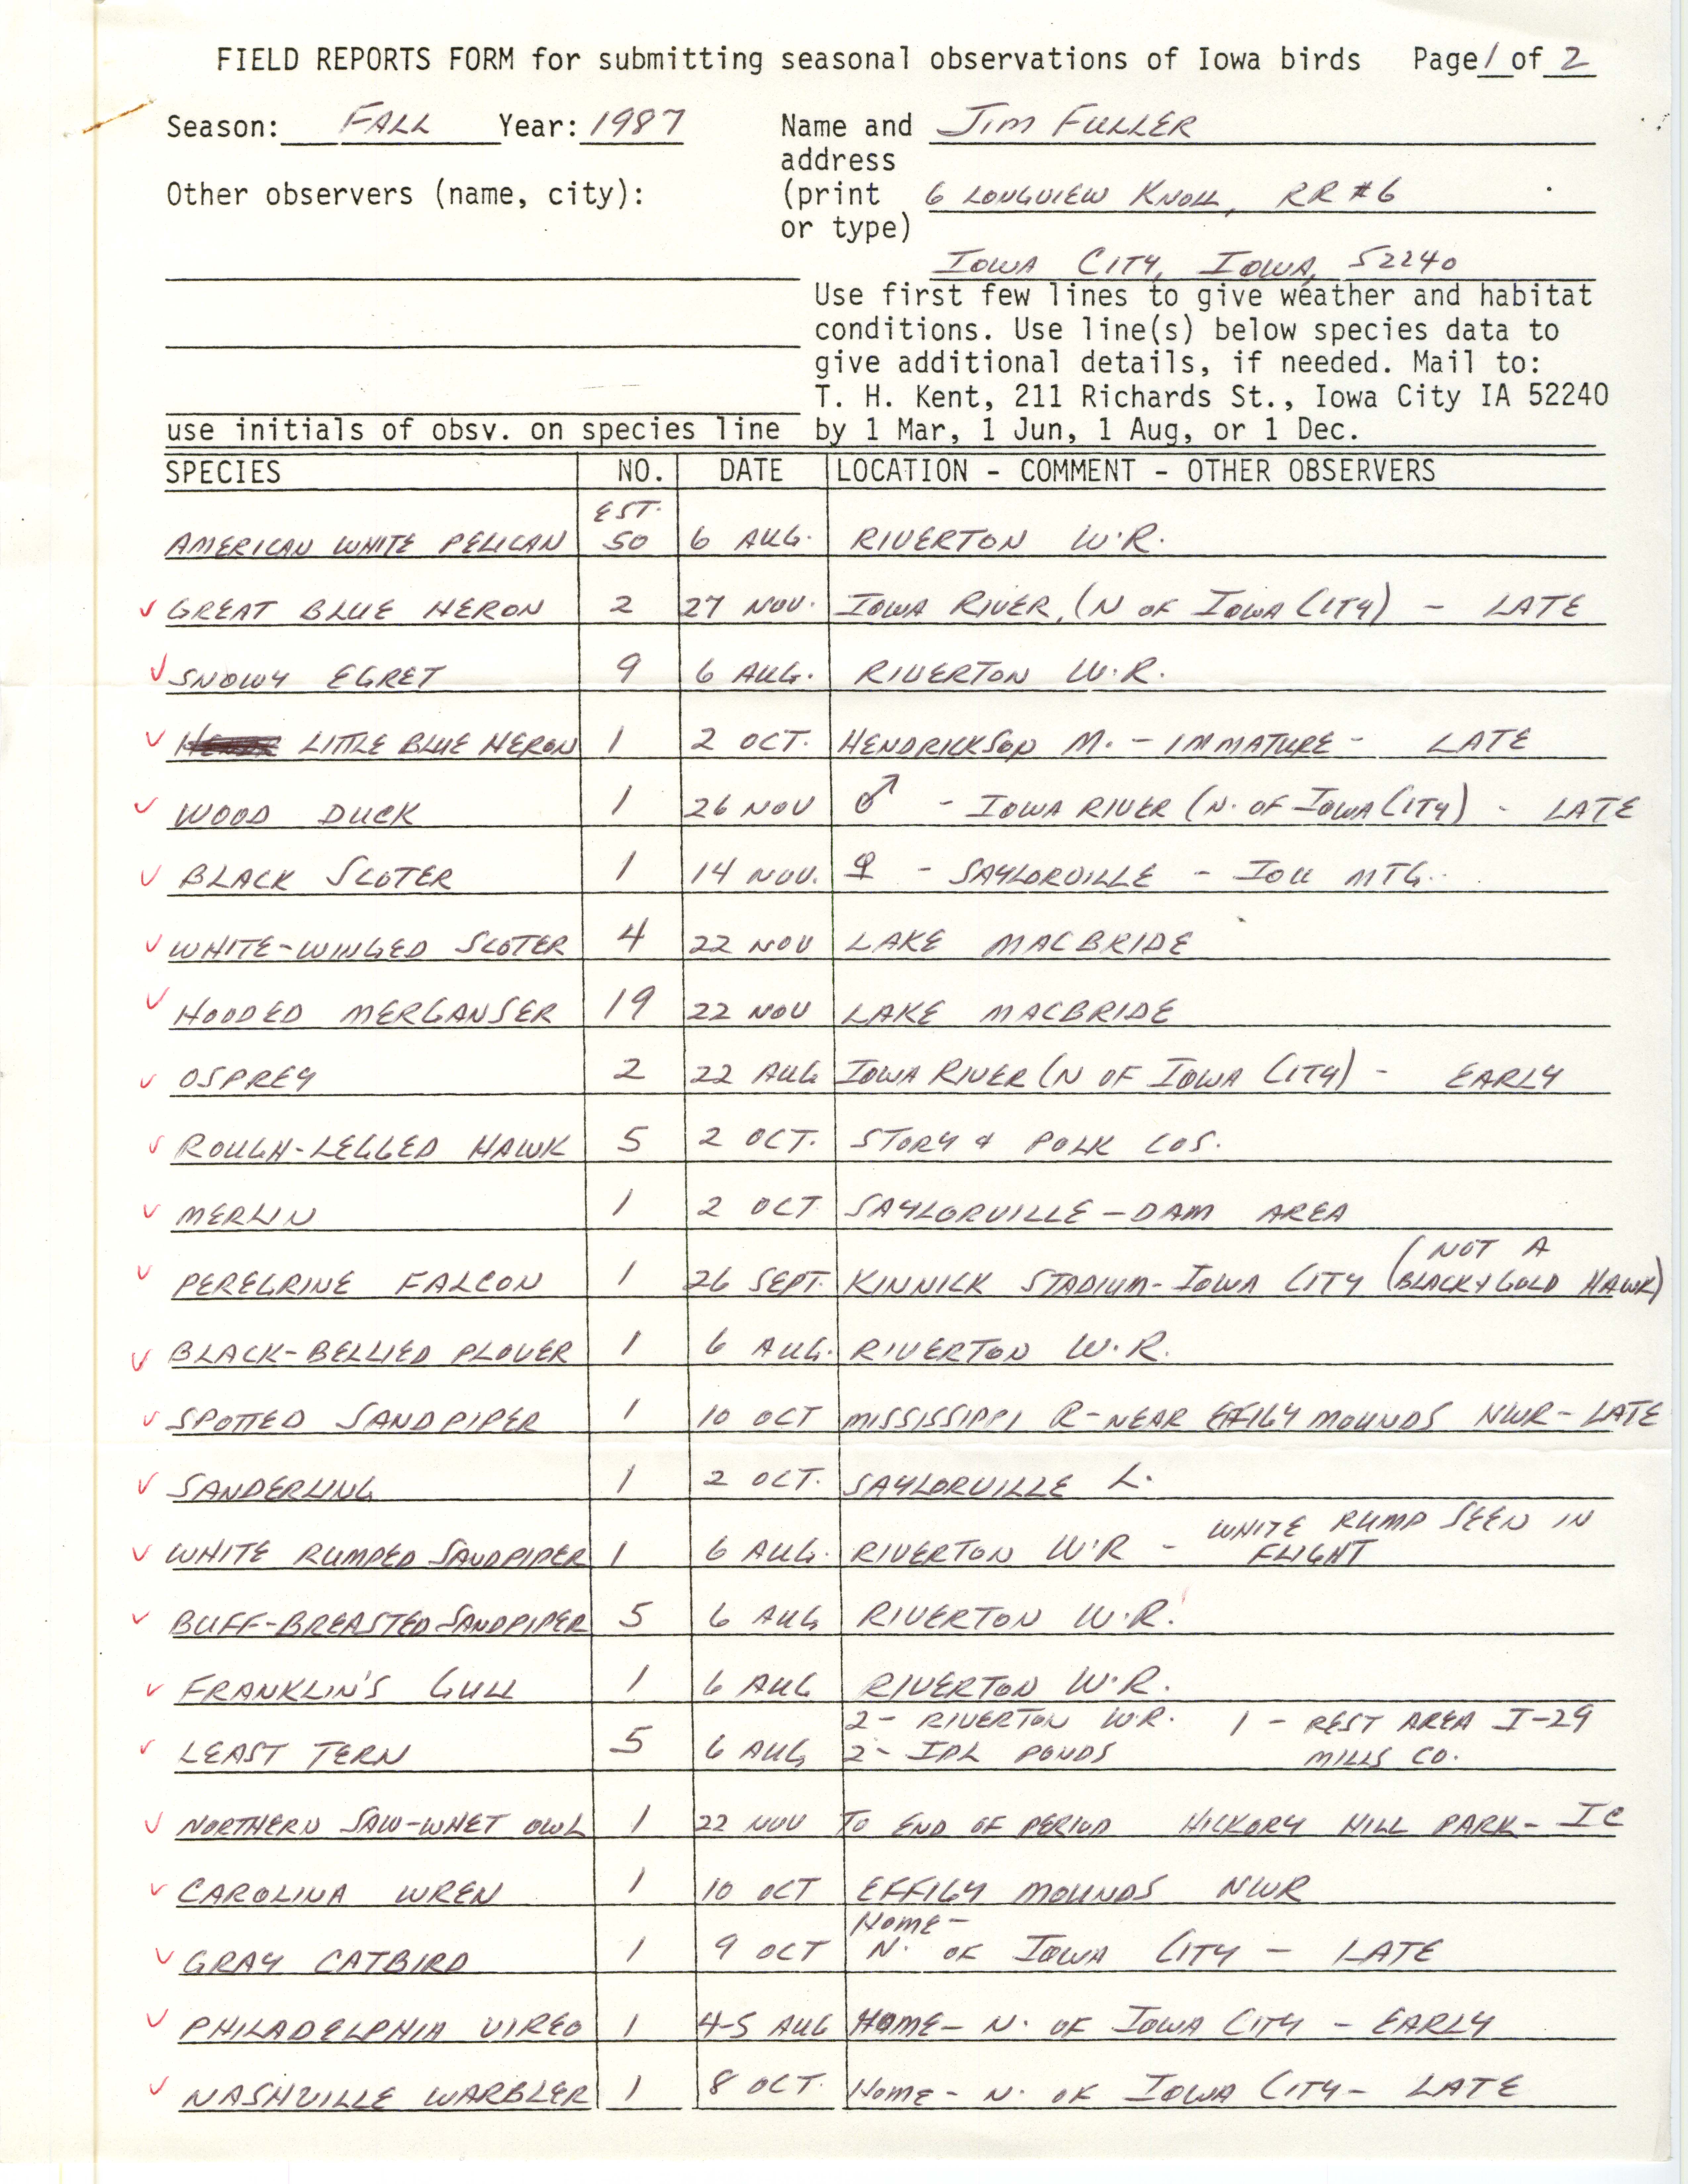 Field reports form for submitting seasonal observations of Iowa birds, James L. Fuller, fall 1987